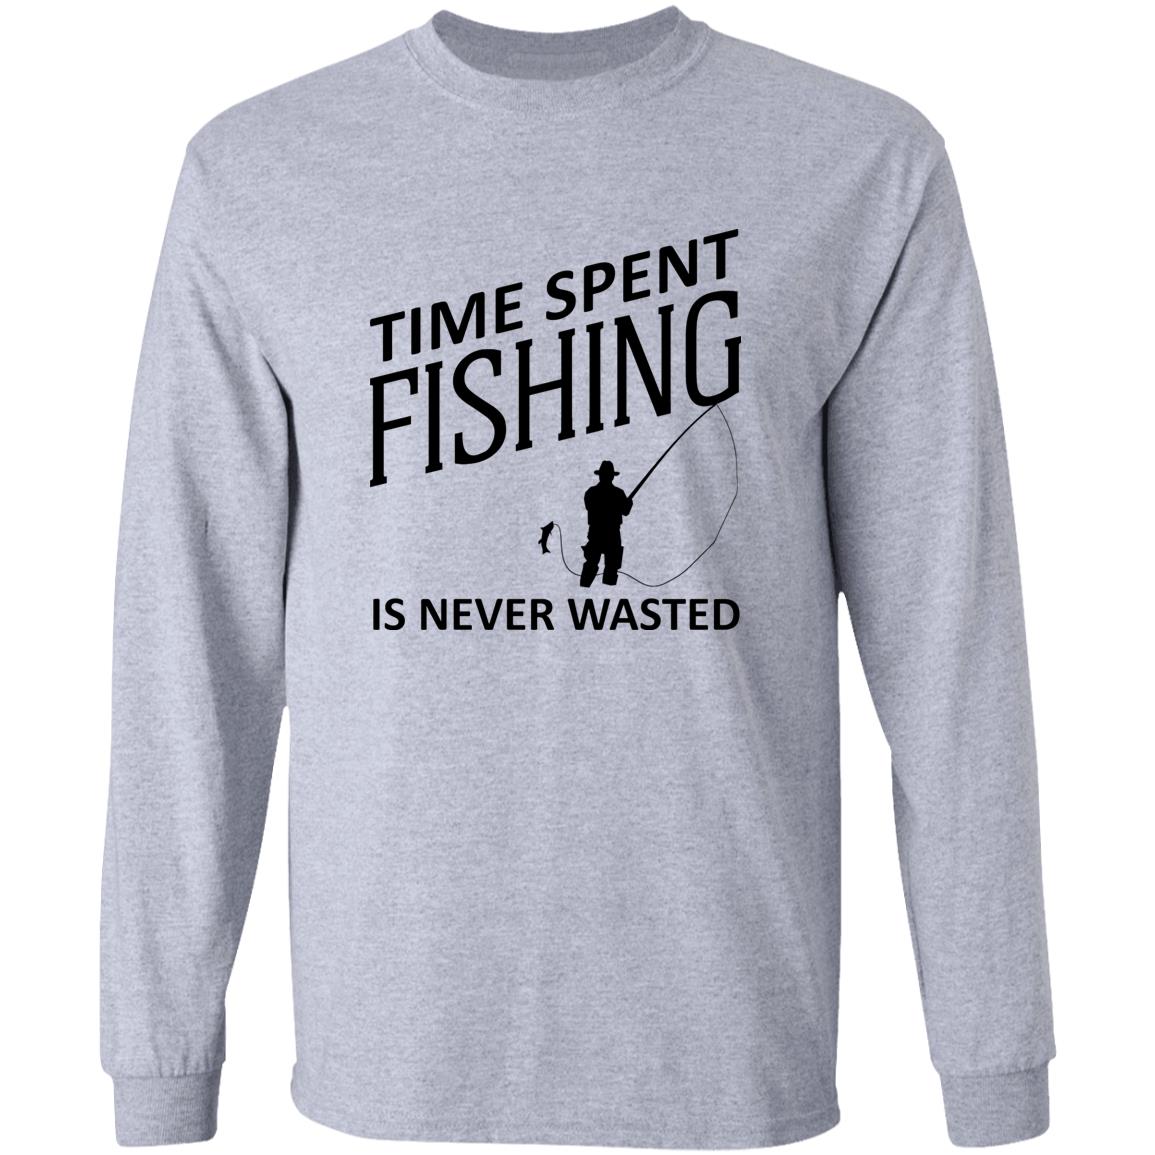 Time Spent Fishing is never wasted Long Sleeve T-Shirt b sport-grey